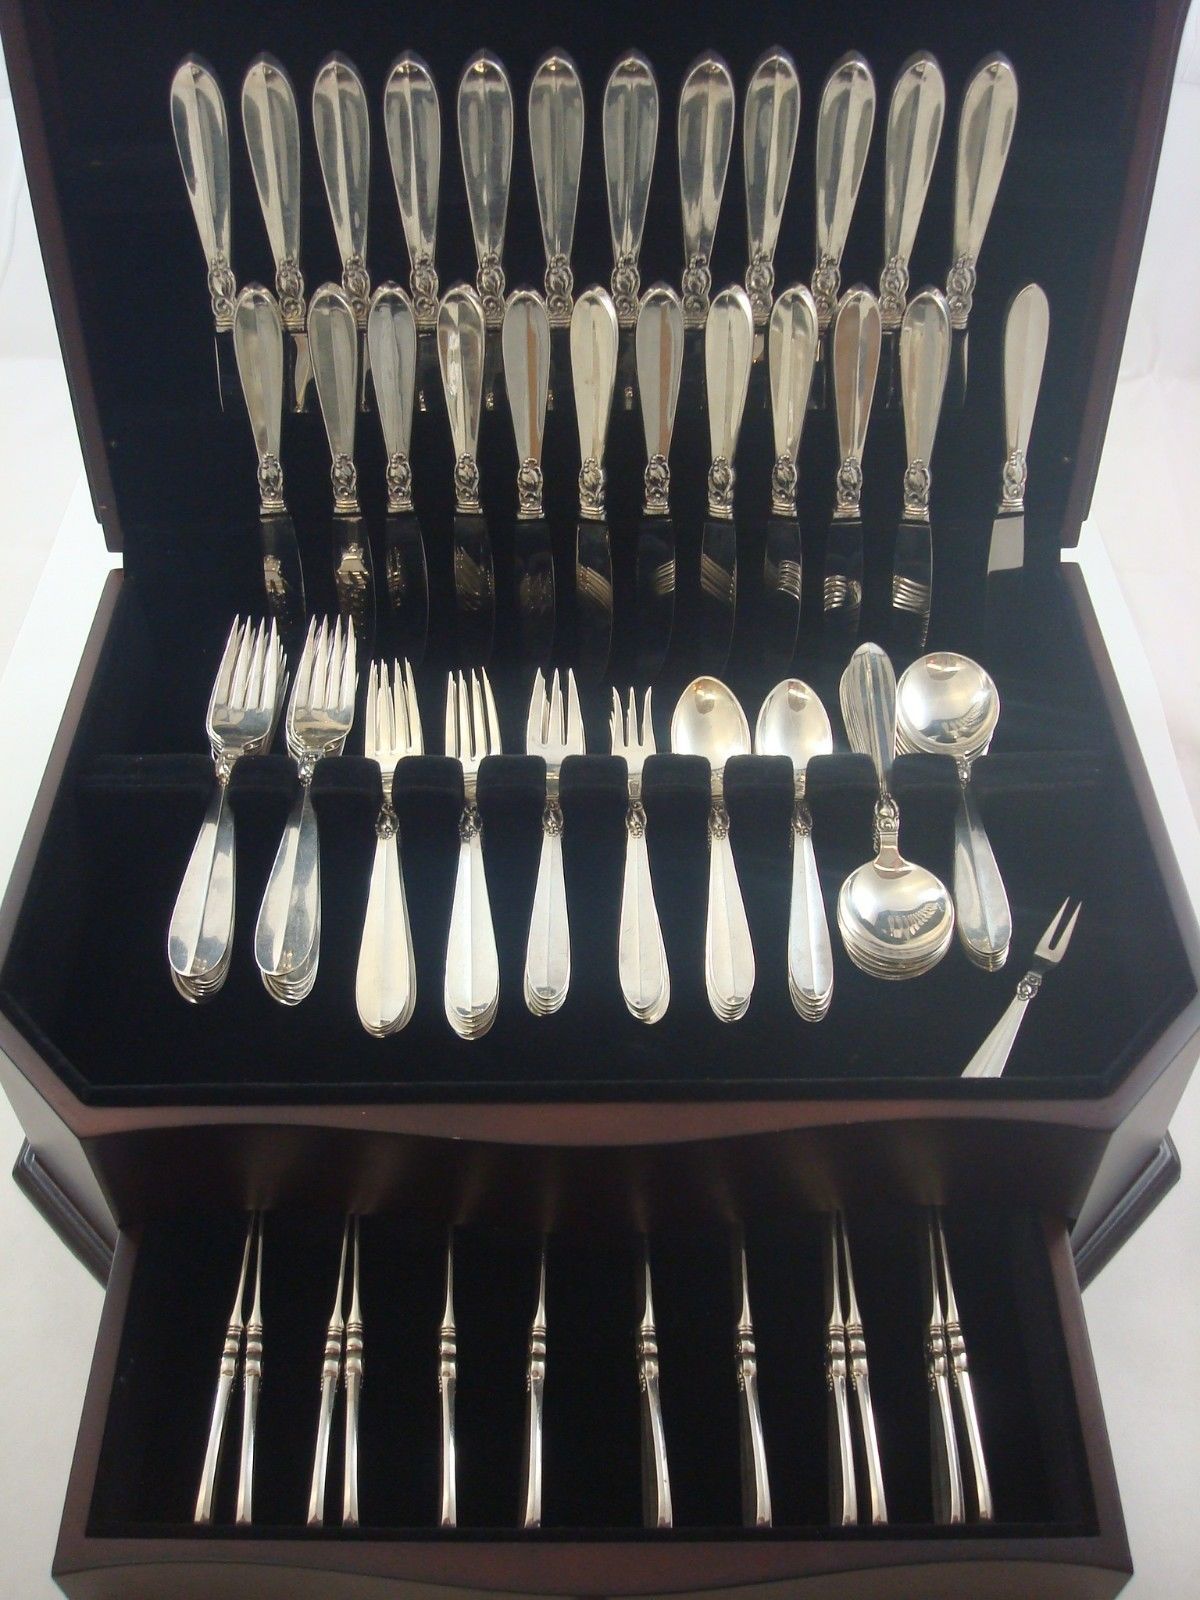 Beautiful Princess Fuchsia by Frigast Danish sterling silver flatware set with blossom design 109 pieces. This set includes:

12 dinner size knives, 9 3/4